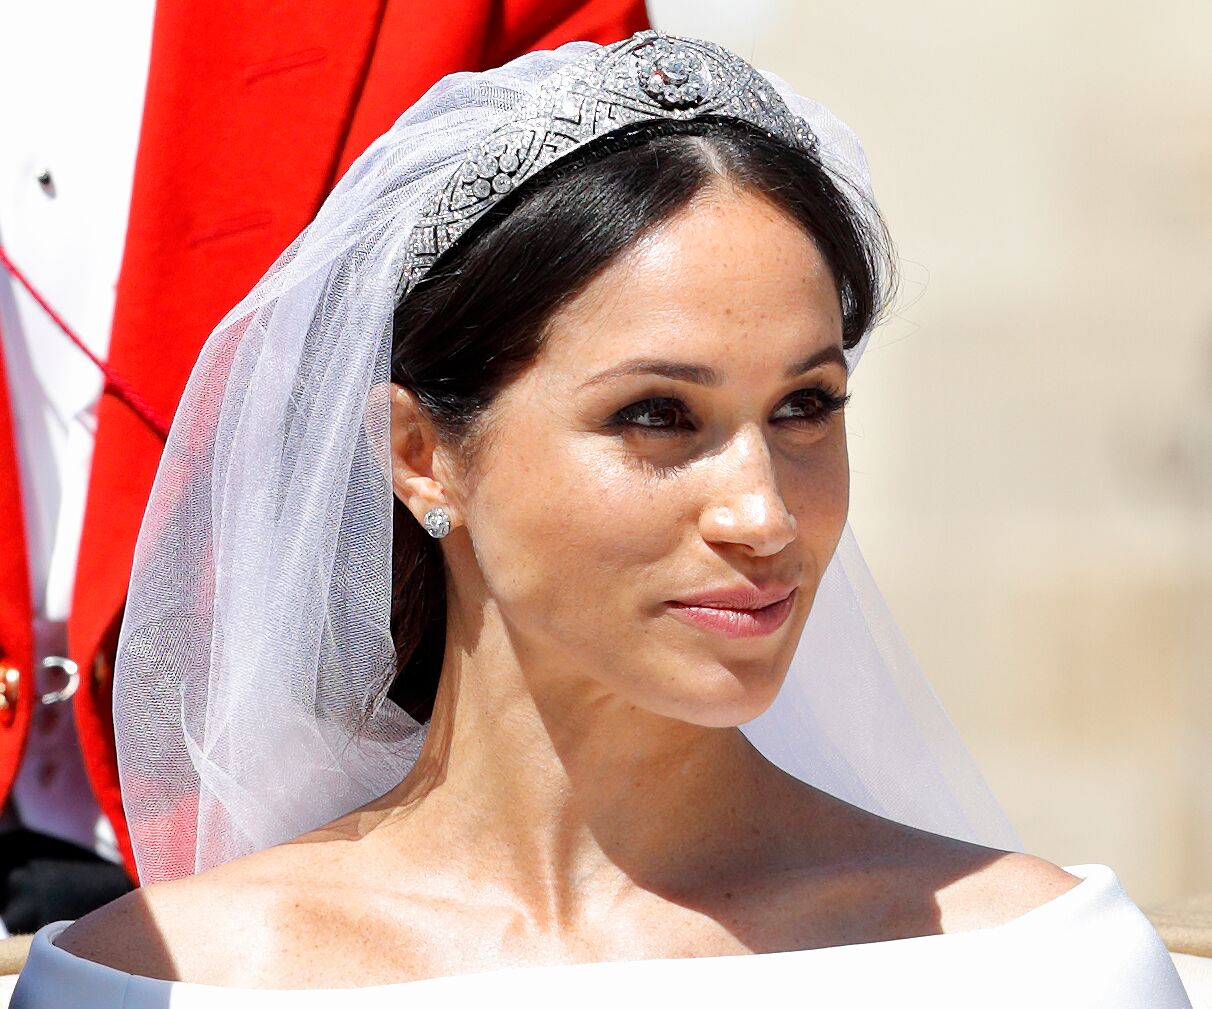 Meghan Markle during her wedding day in May 2018. | Source: Getty Images